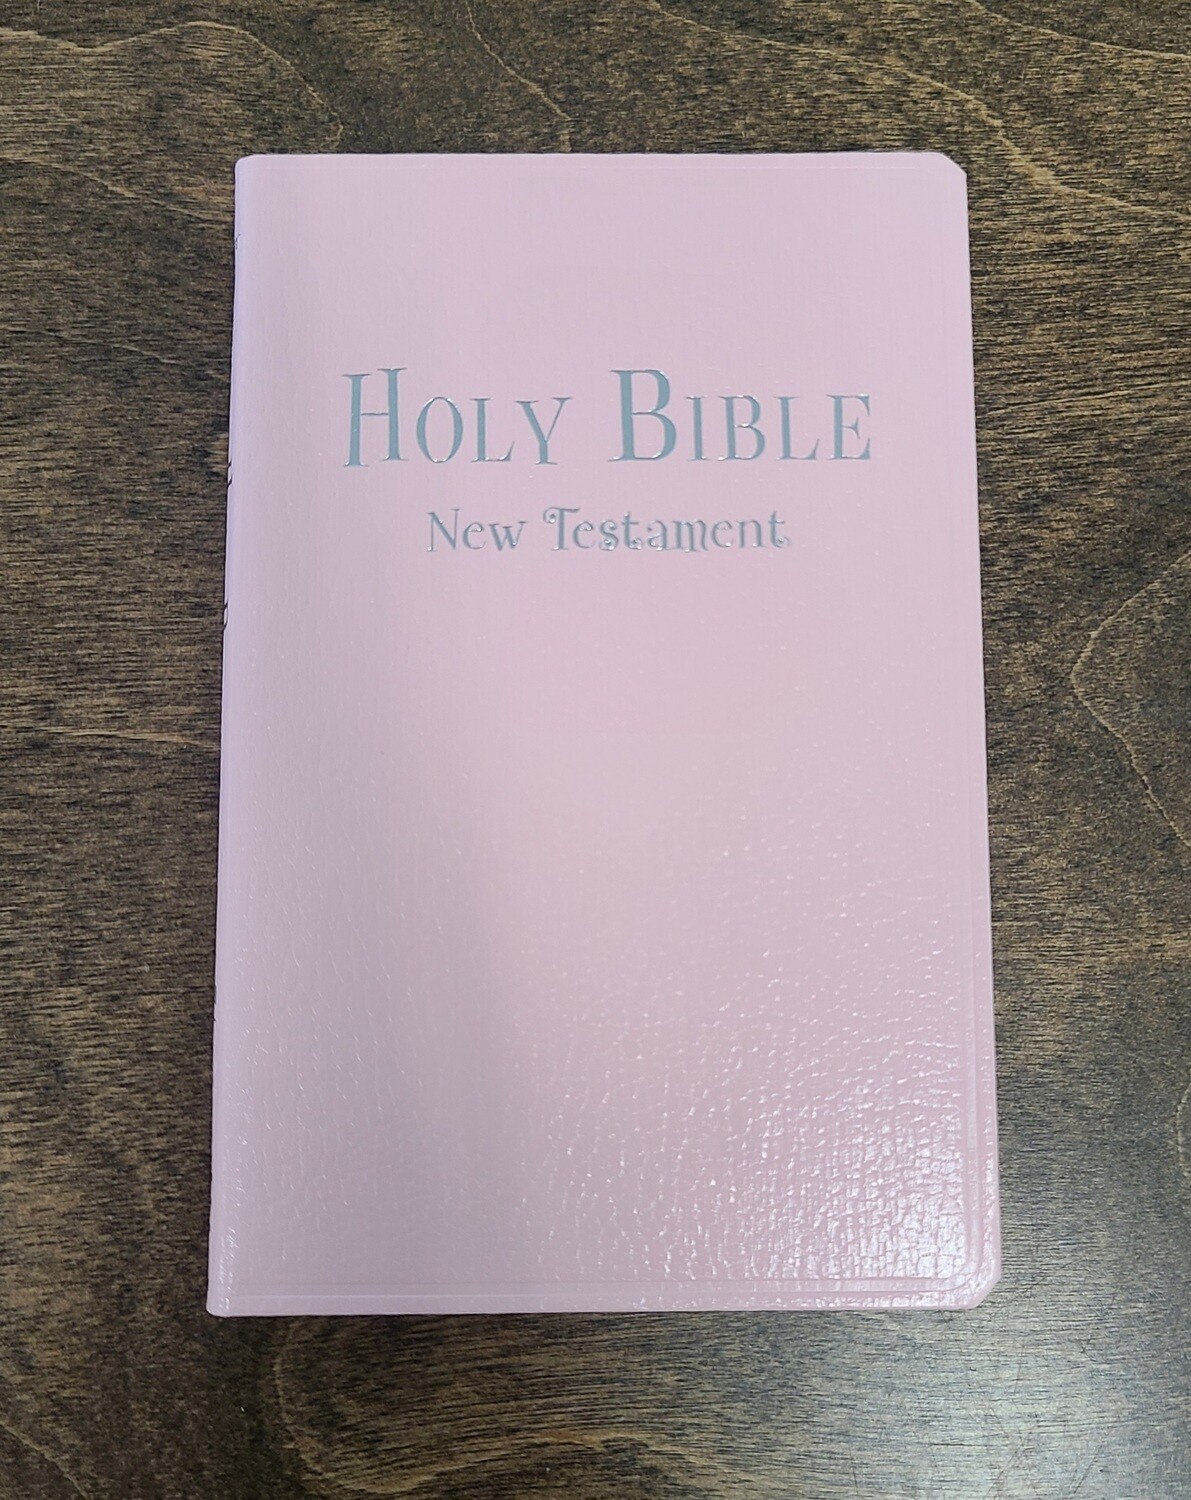 NIV Tiny Testament Holy Bible - Pink Leather